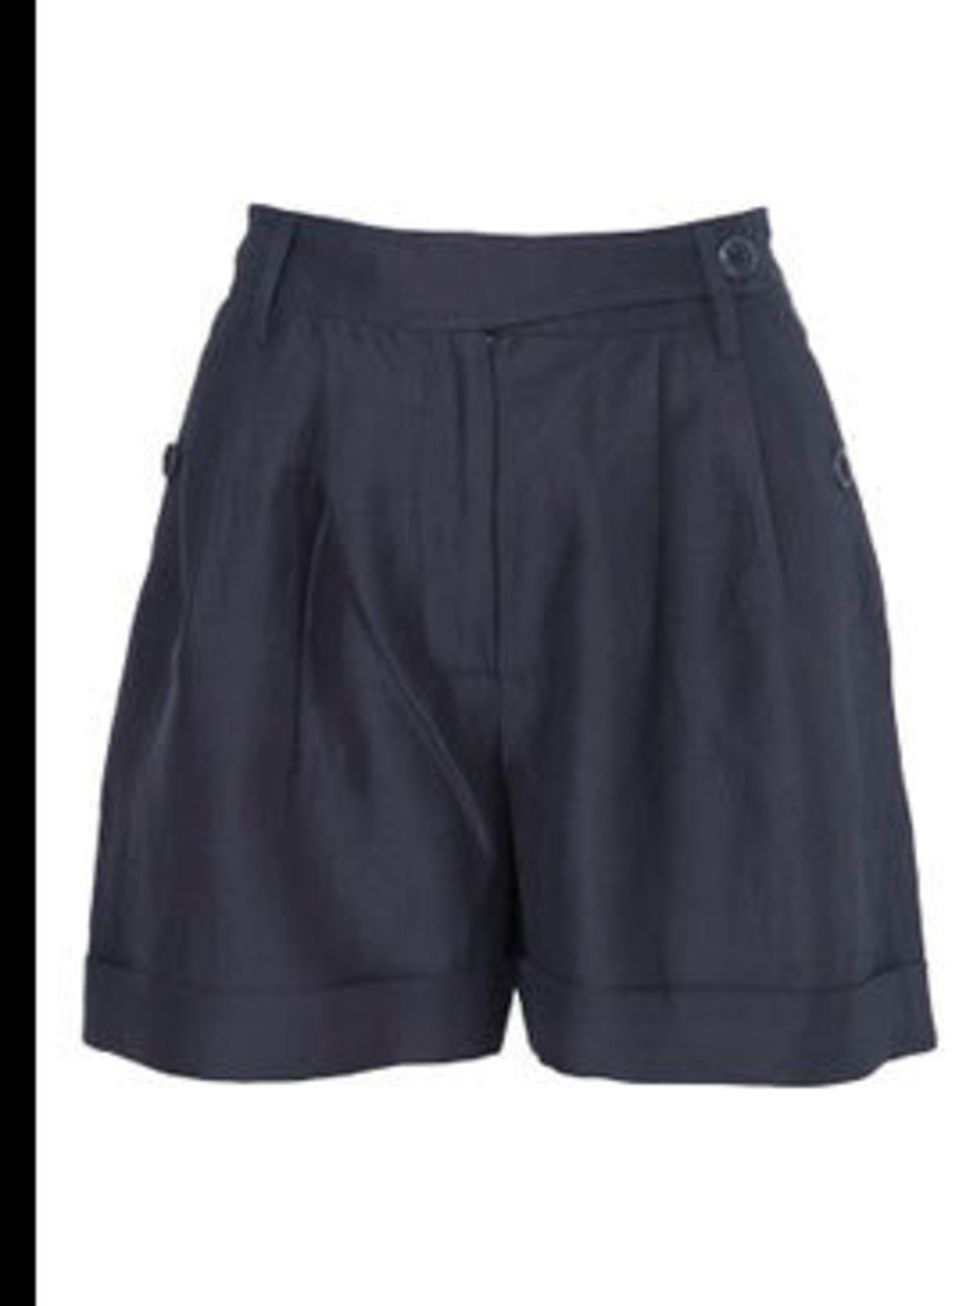 <p>Shorts, £70 by <a href="http://www.whistles.co.uk/fcp/product/whistles/newin/Navy-Cross-Over-Front-Short/903000052636">Whistles</a></p>